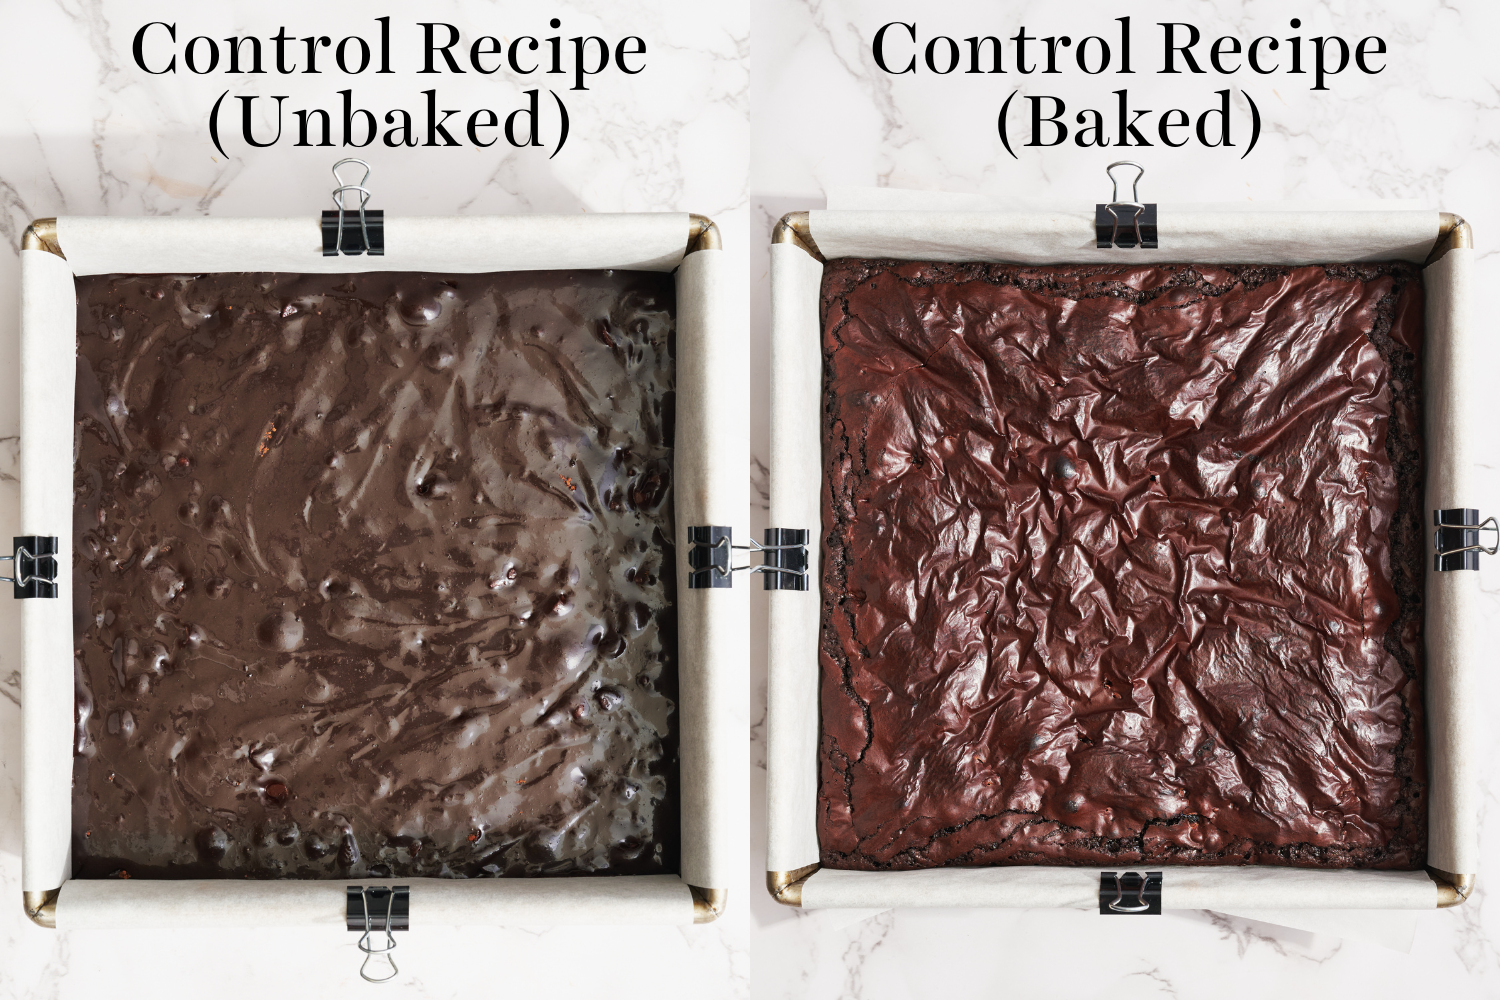 side-by-side images of the control recipe before and after baking.